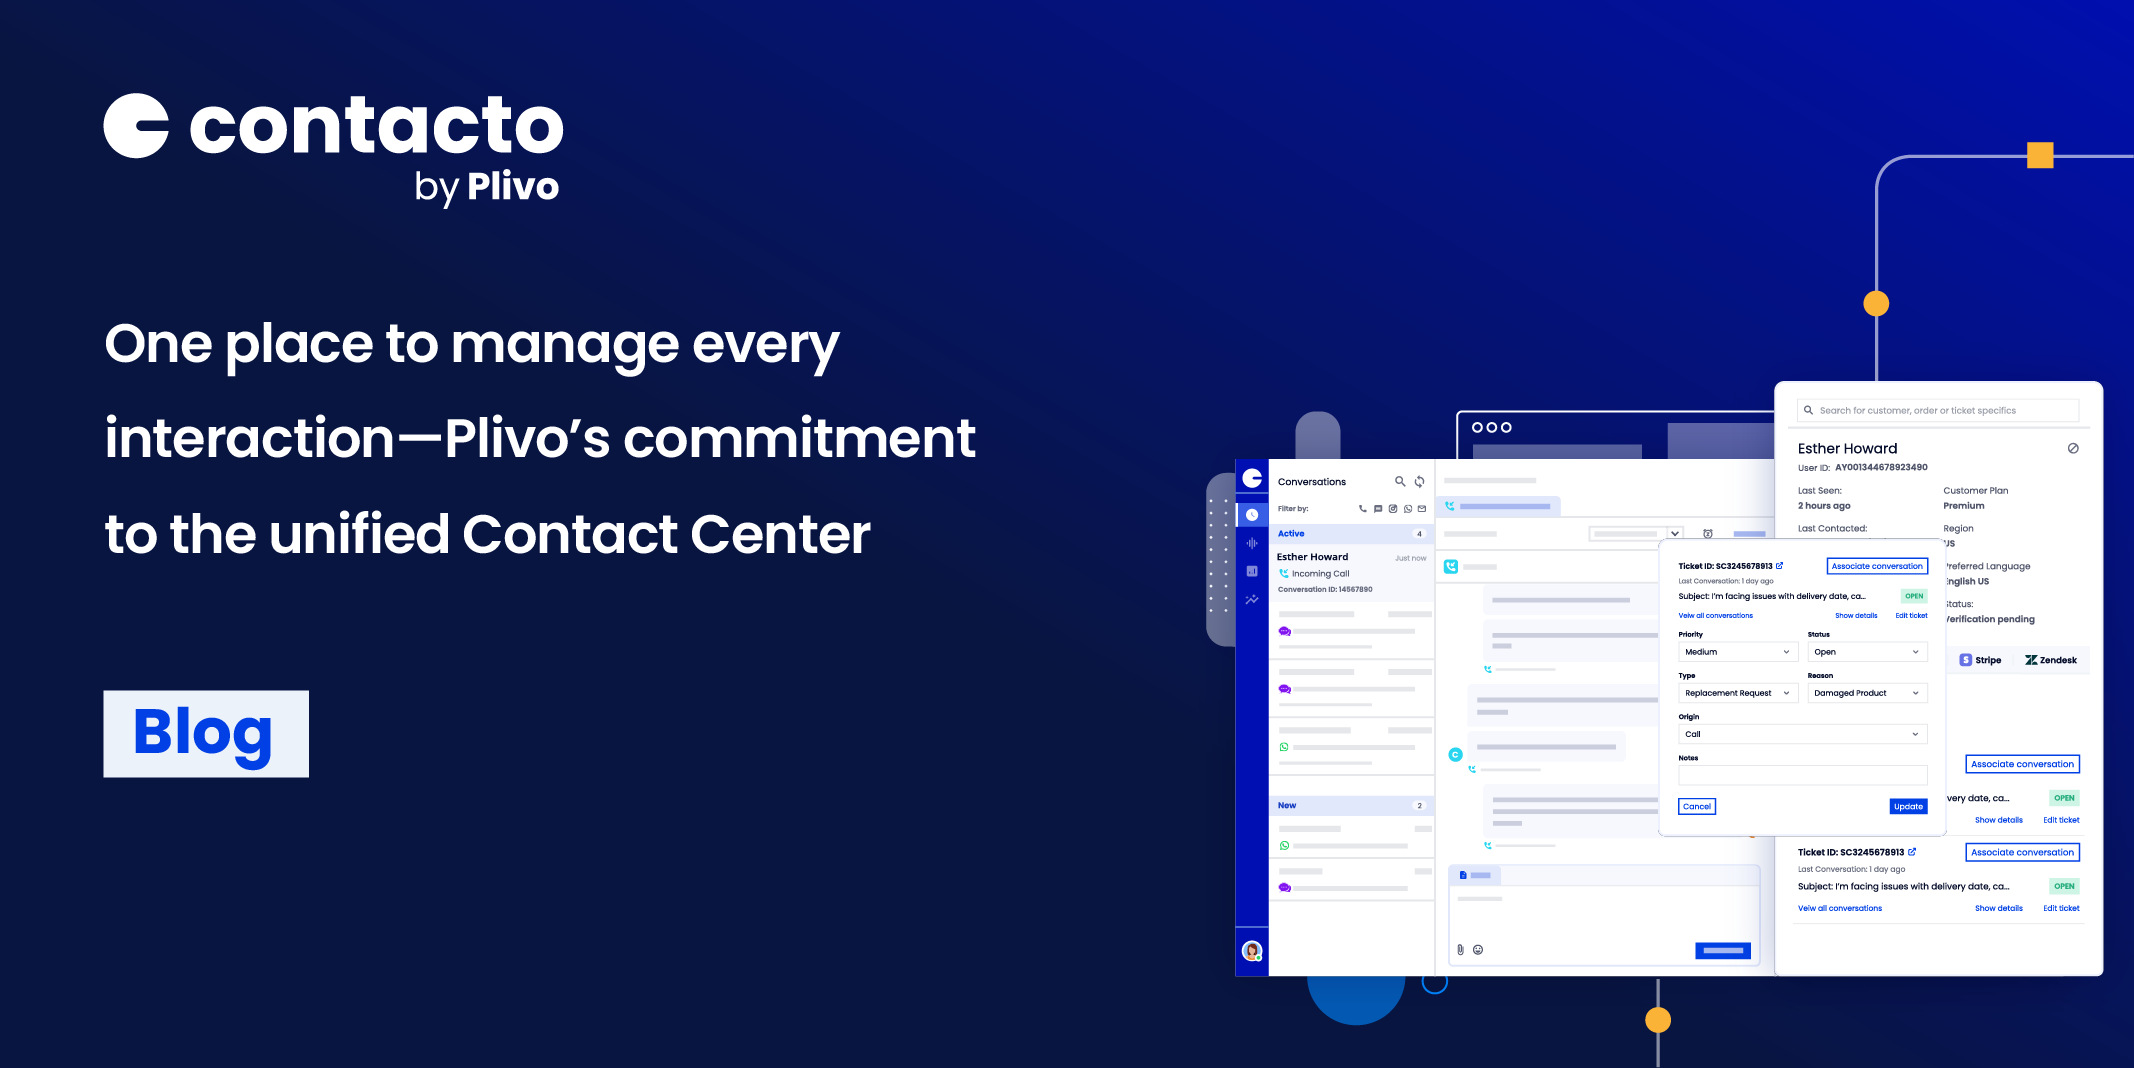 Manage Every Interaction with a Unified Contact Center | Contacto Blog